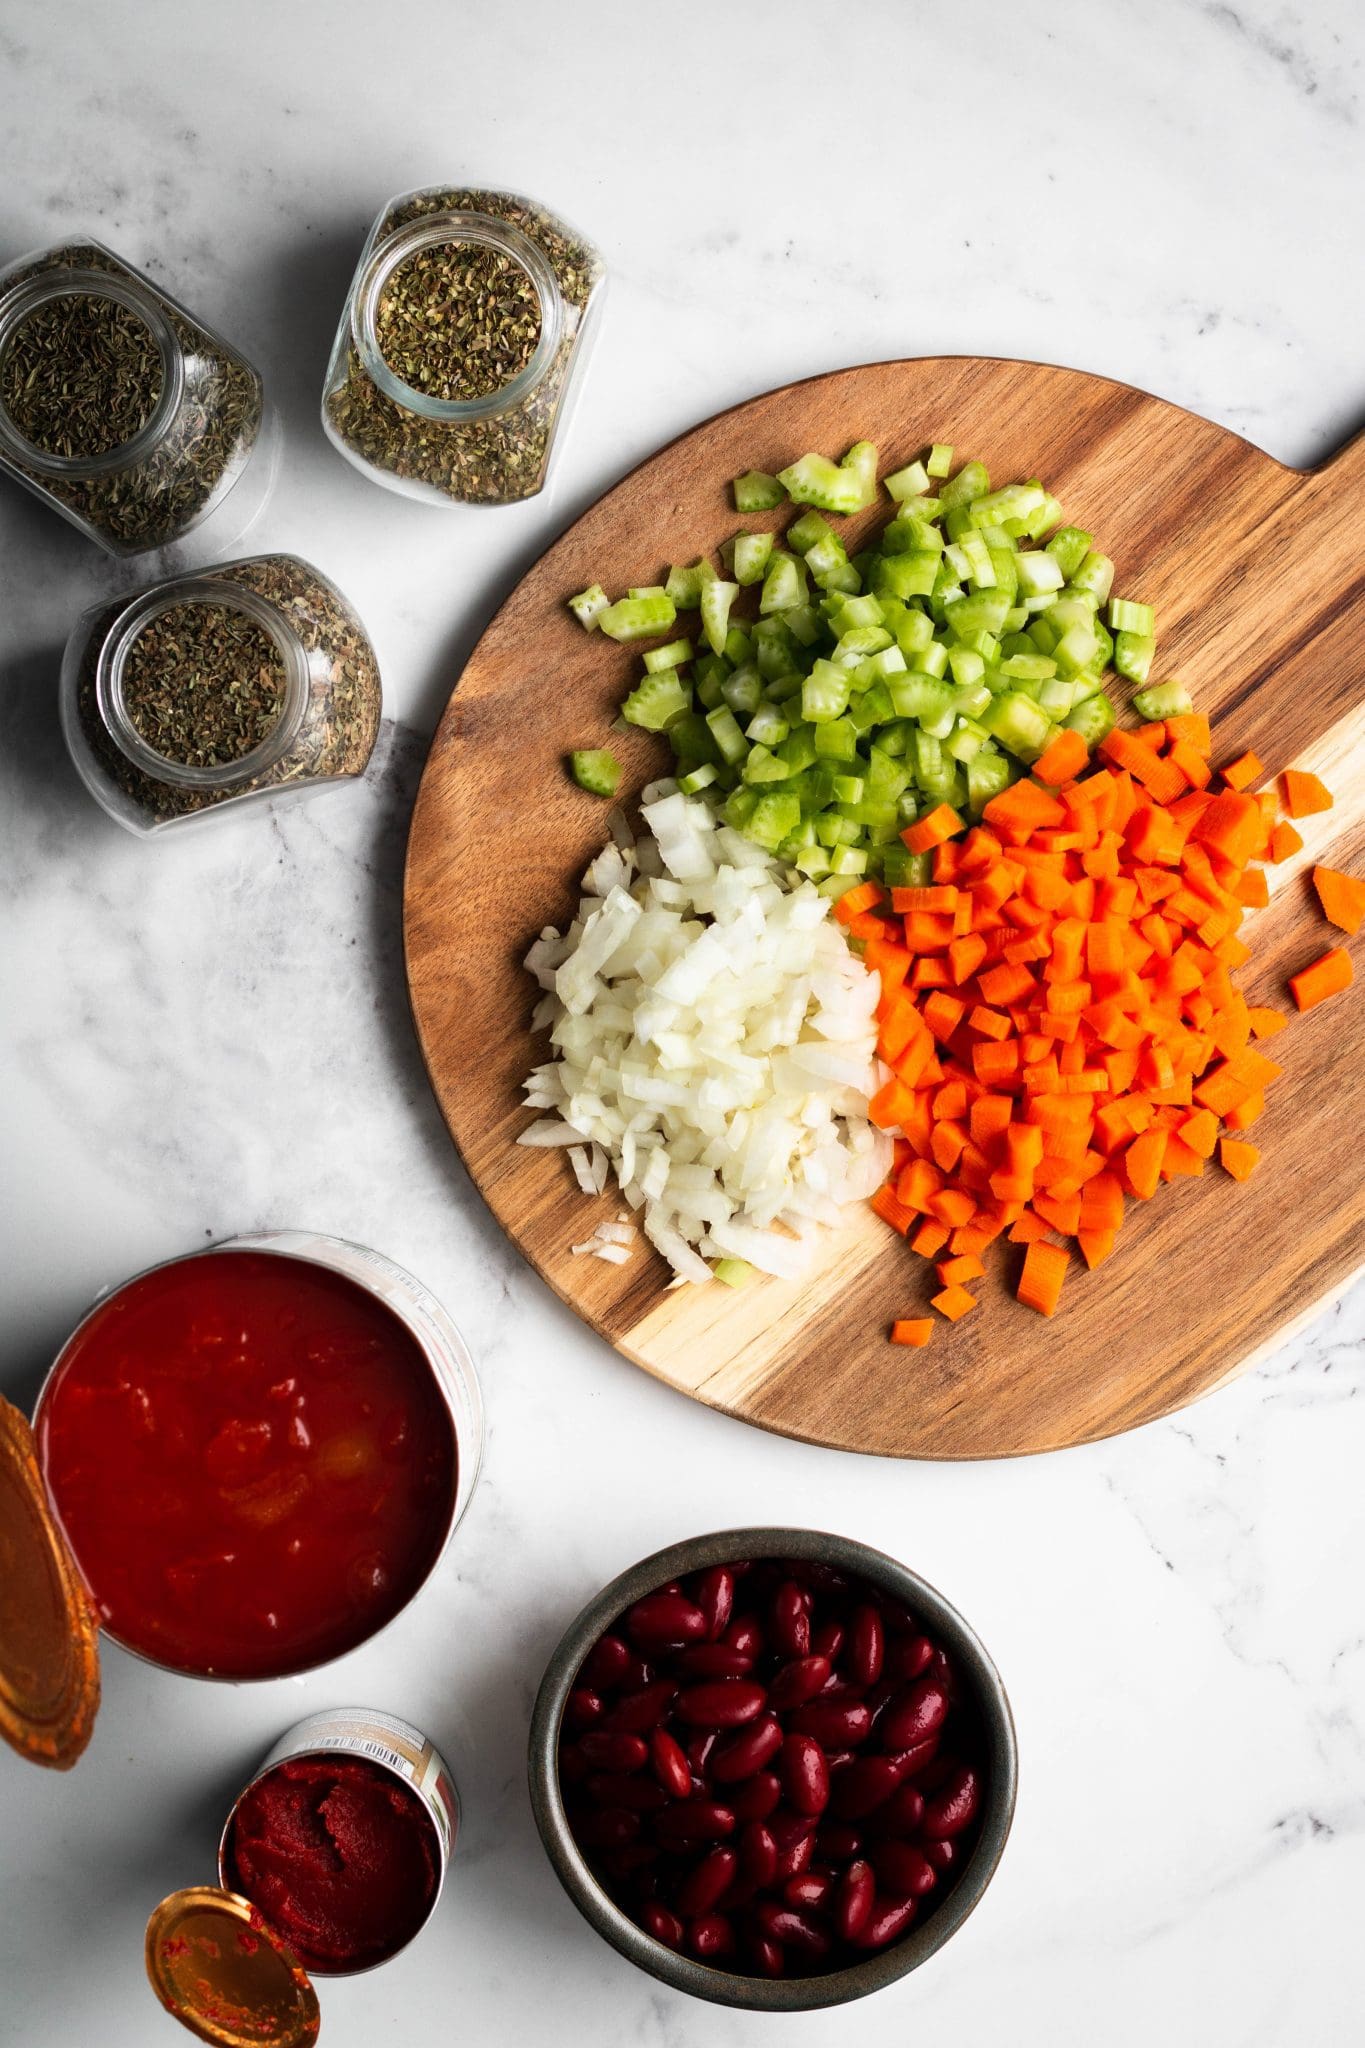 diced carrots, onions and celery on a cutting board with herbs, beans and canned tomatoes on the side